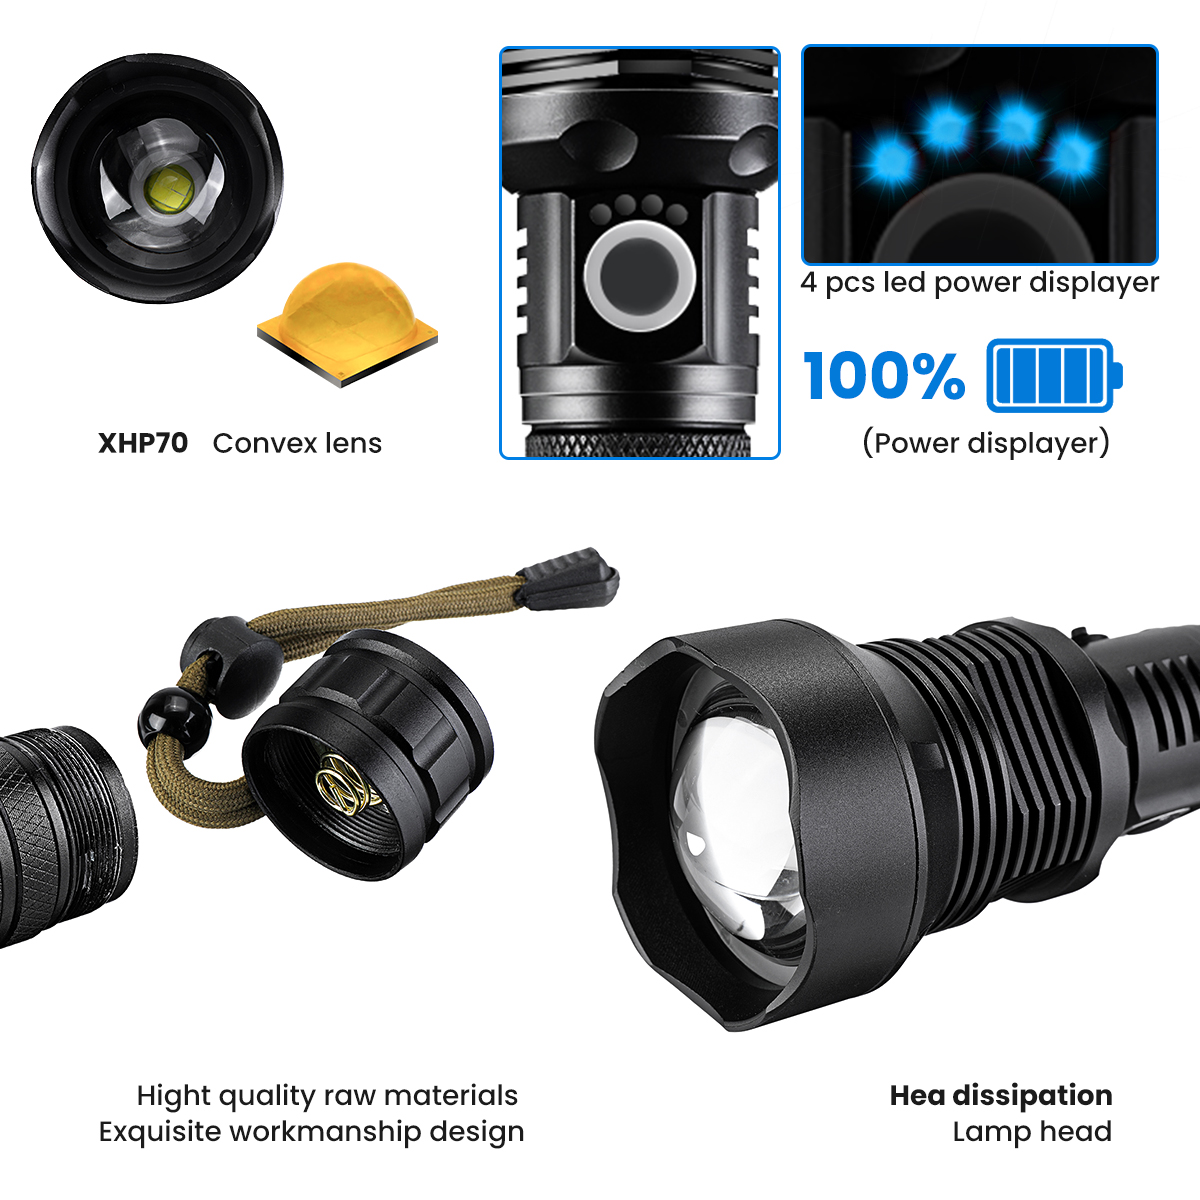 CHARMINER-P702-Zoomable-Flashlight-Kit-with-2x-26650-Li-ion-Battery-USB-Cable-USB-Rechargeable--Powe-1749968-3